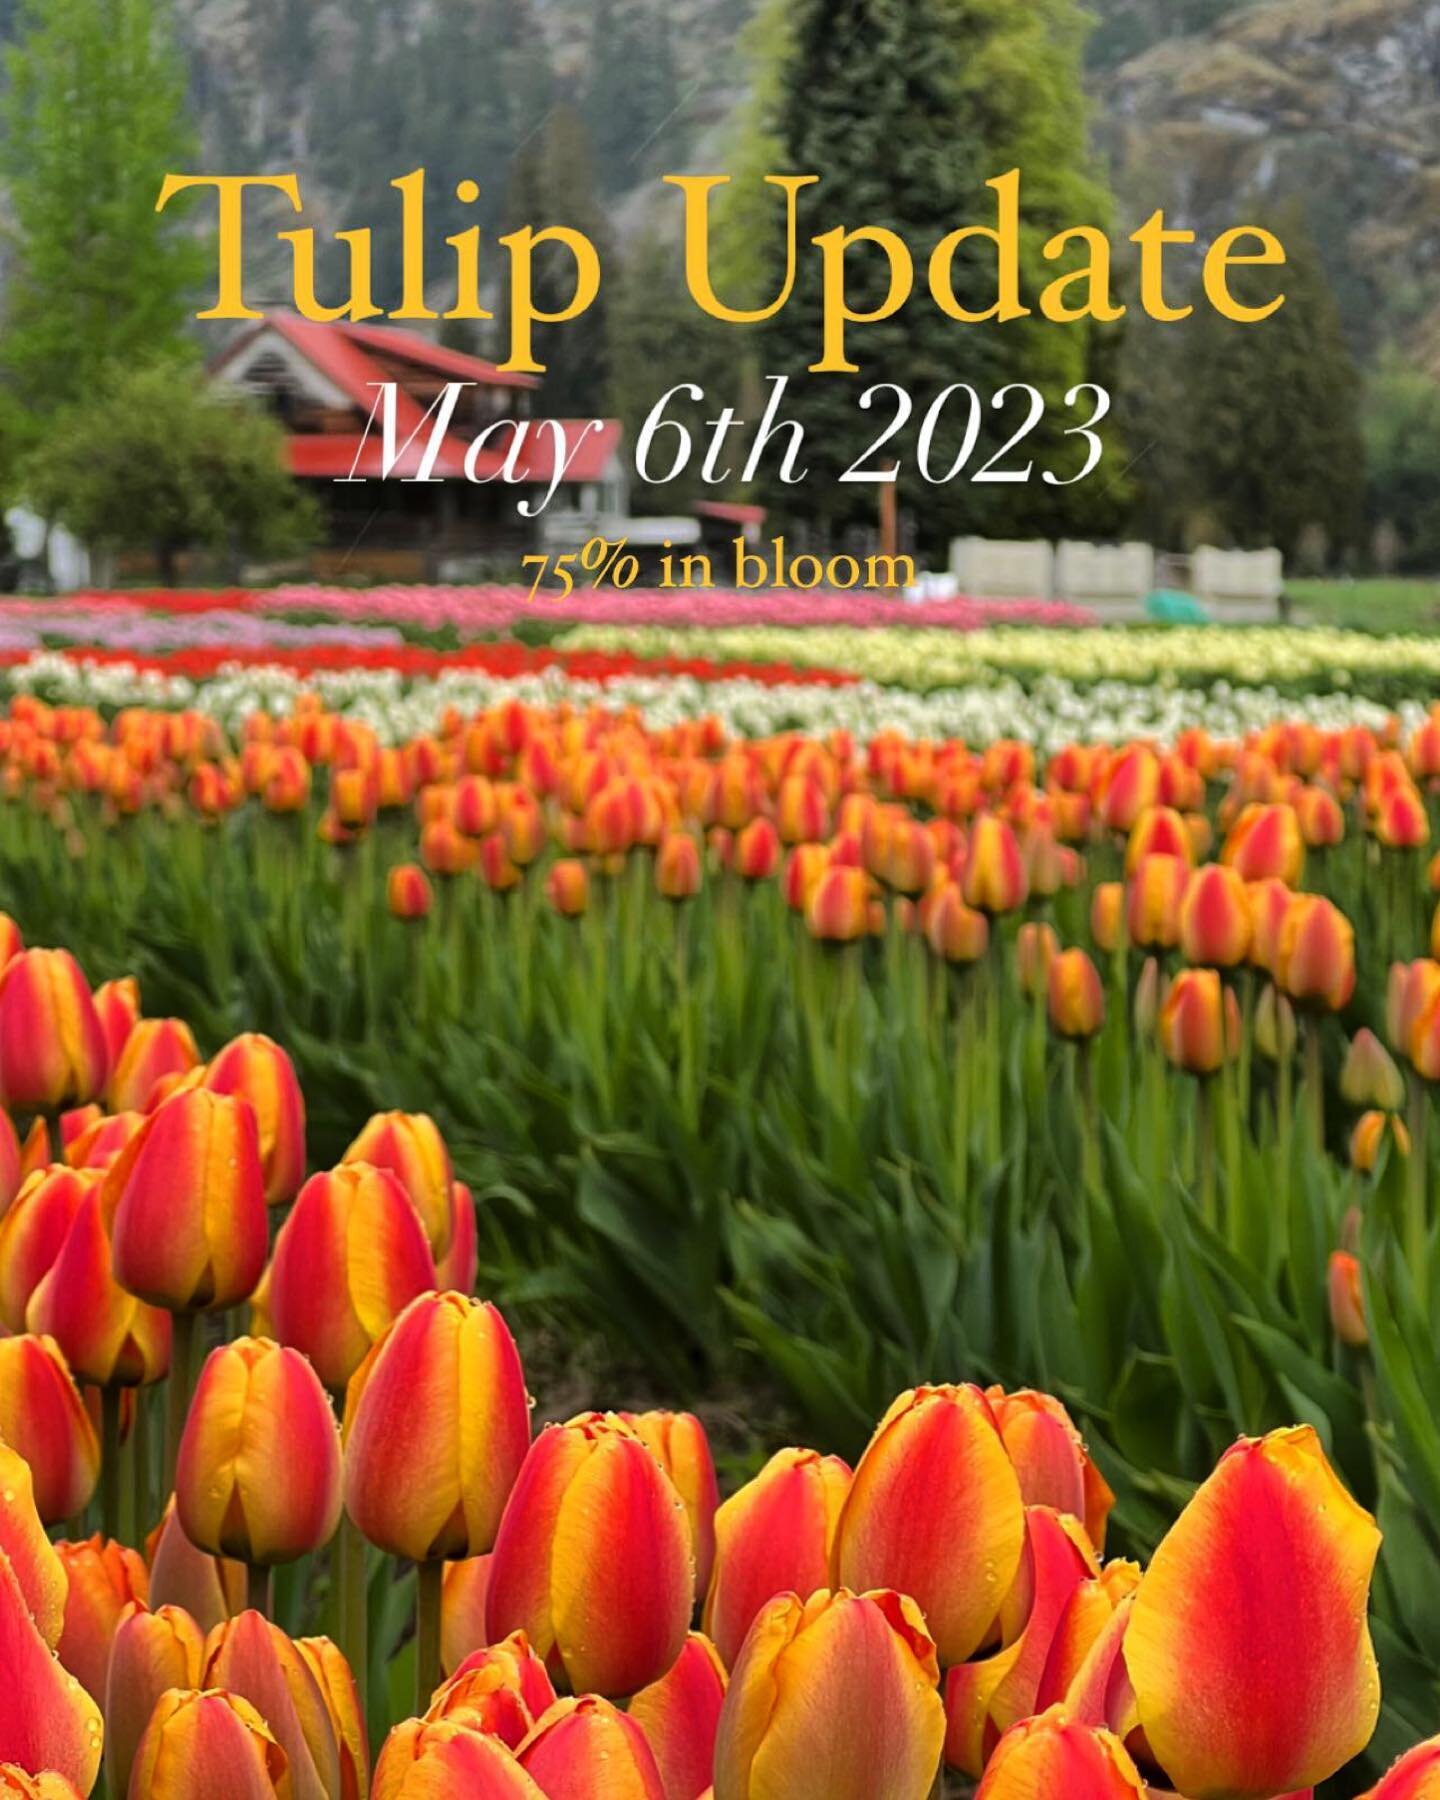 Shaping up to be a great weekend for tulip viewing